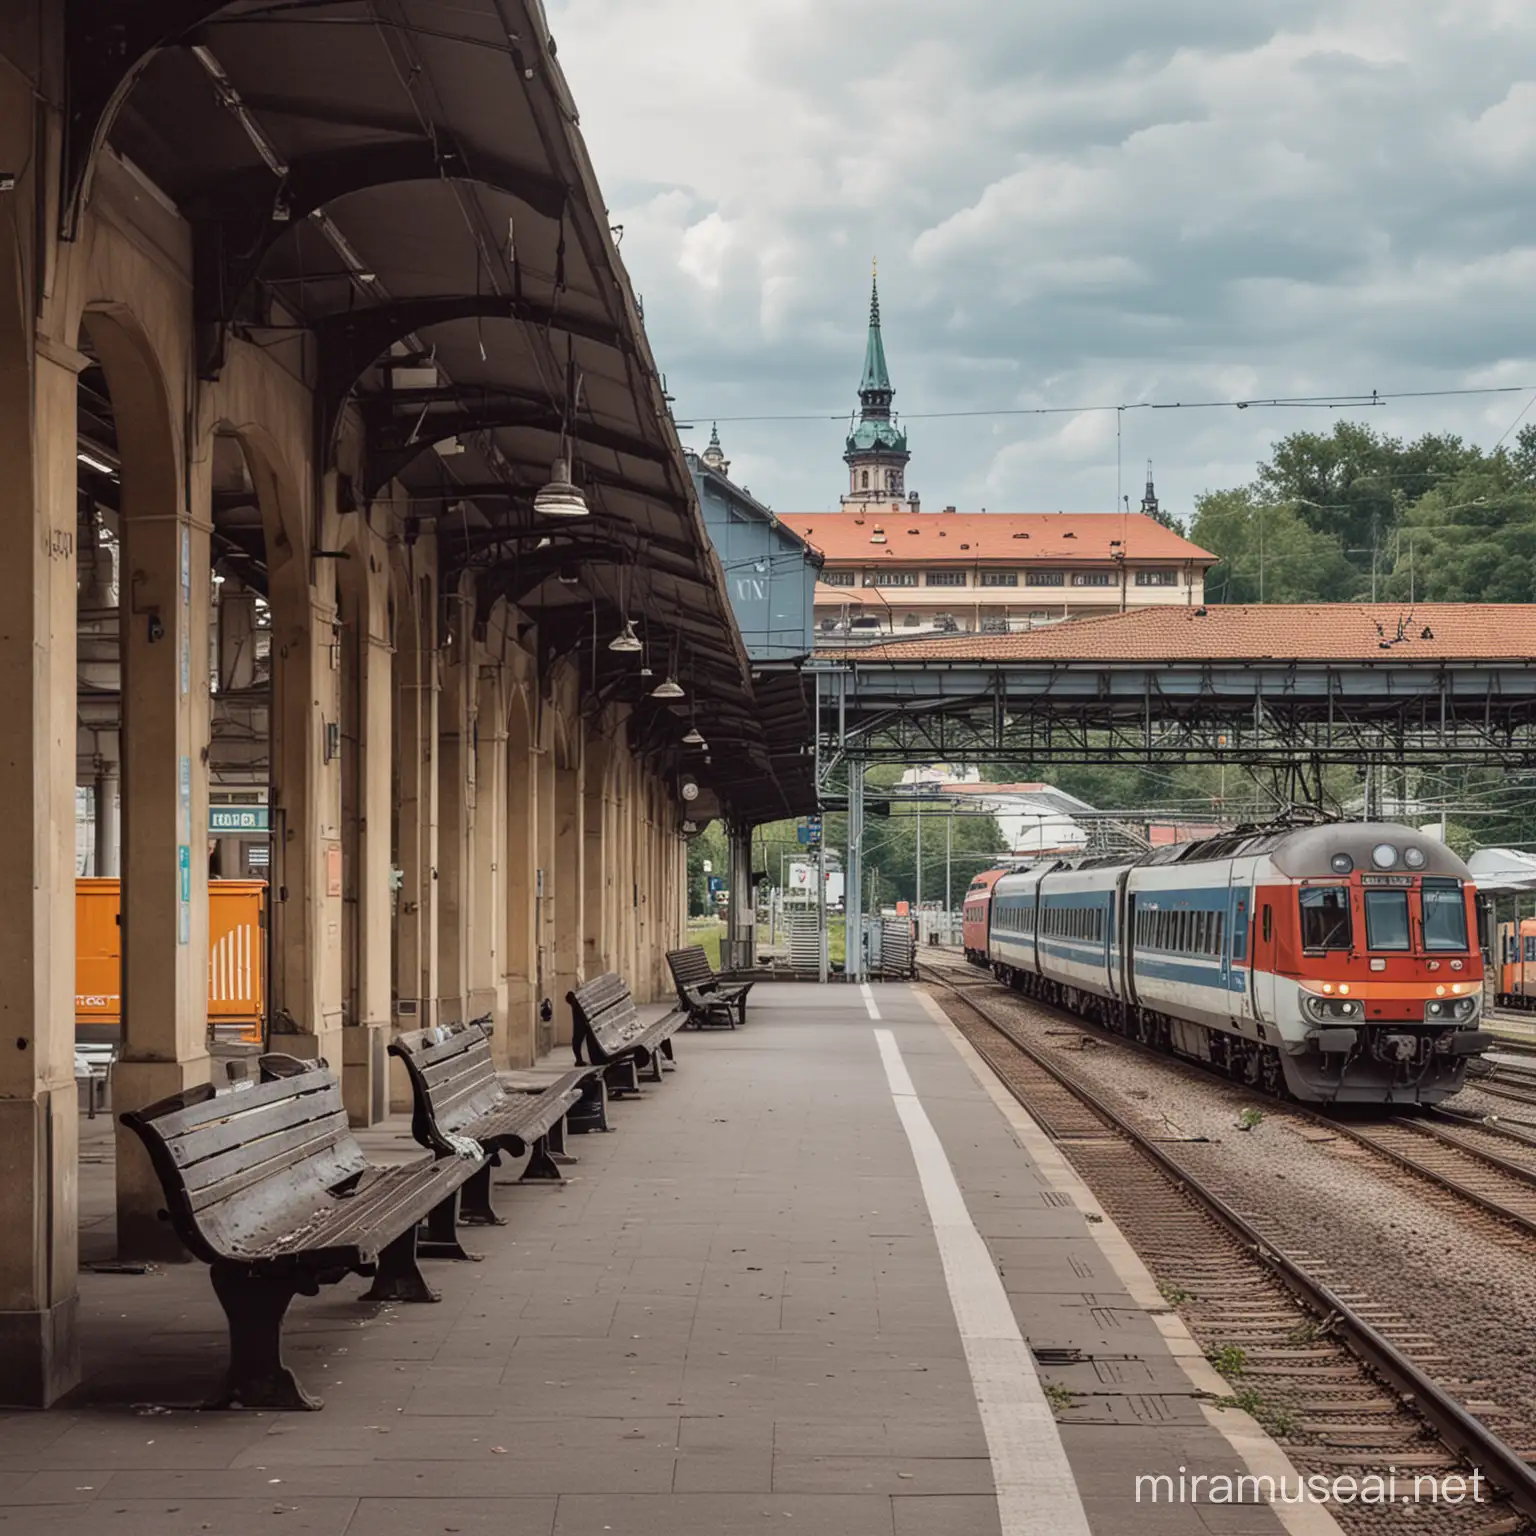 Czech railway station with a train on the platform, benches and trash cans